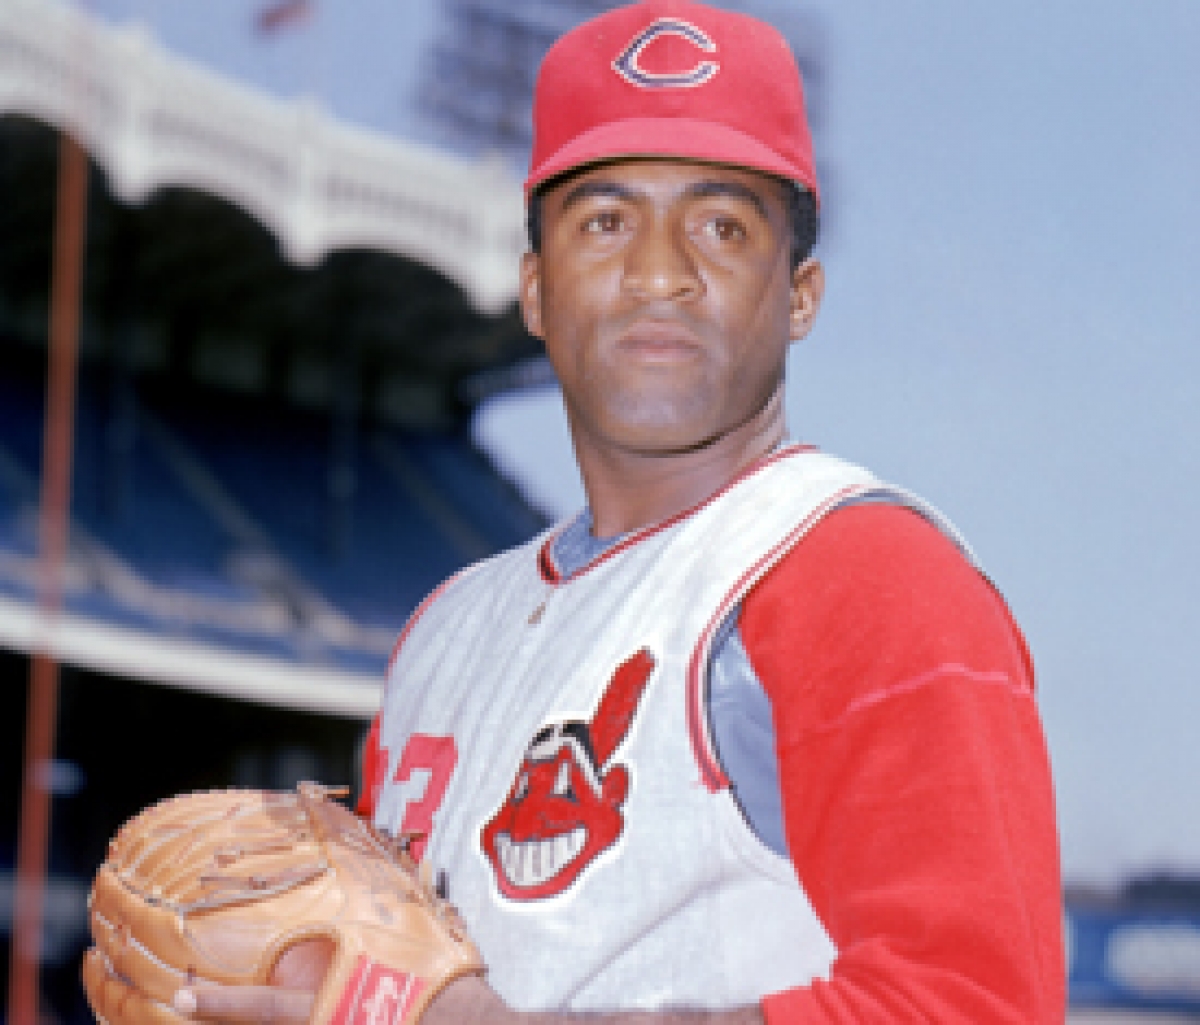 Not in Hall of Fame - 42. Luis Tiant